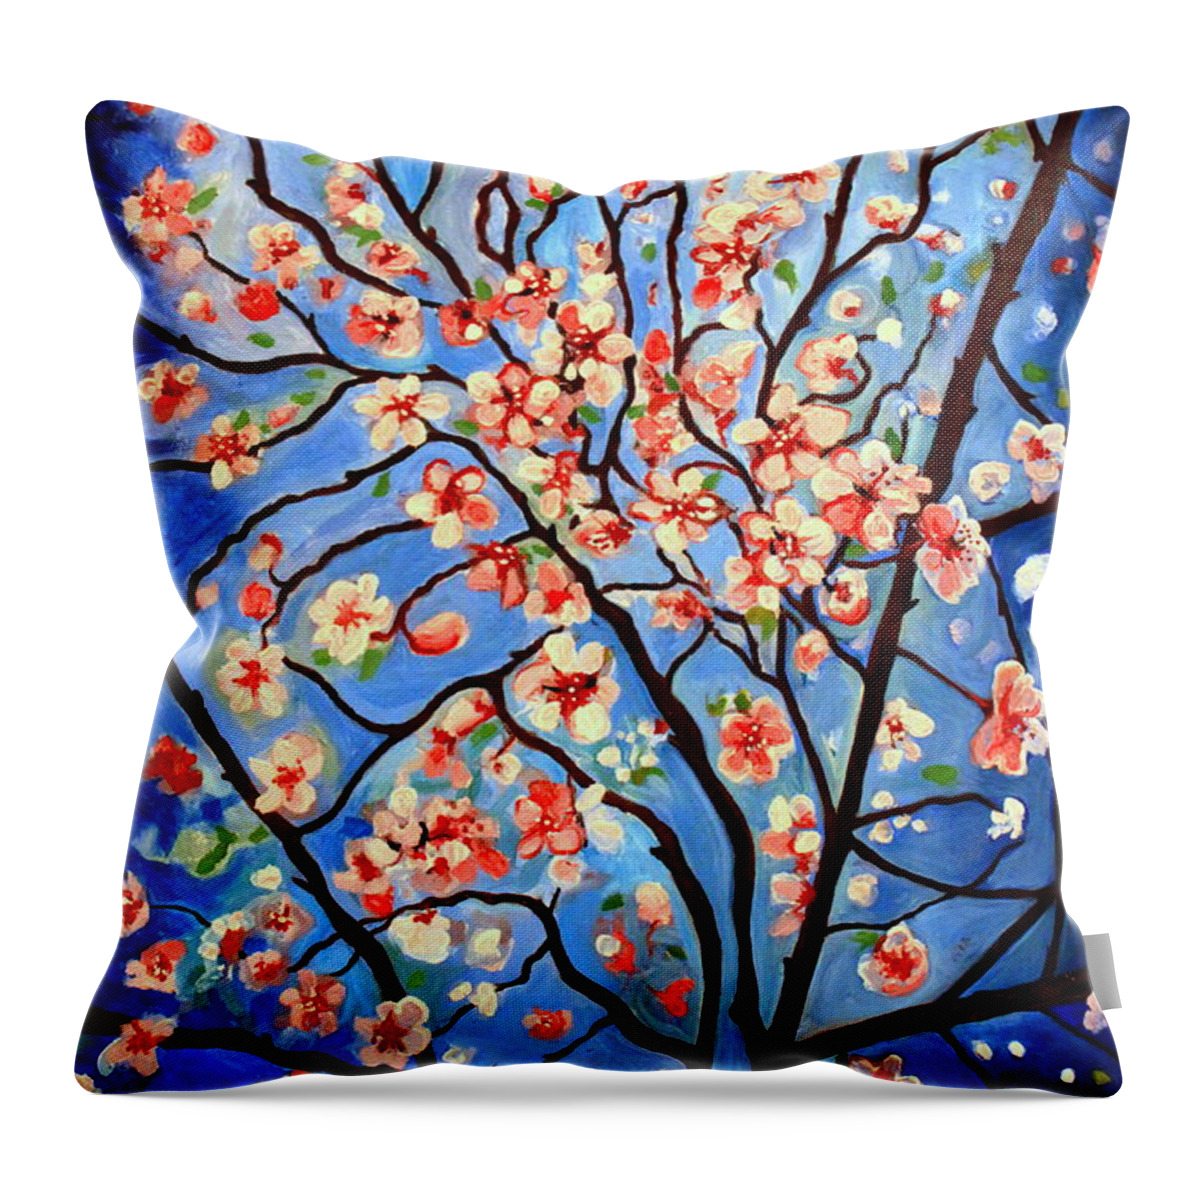 Cherry Blossoms Throw Pillow featuring the painting Whimsical by Elizabeth Robinette Tyndall